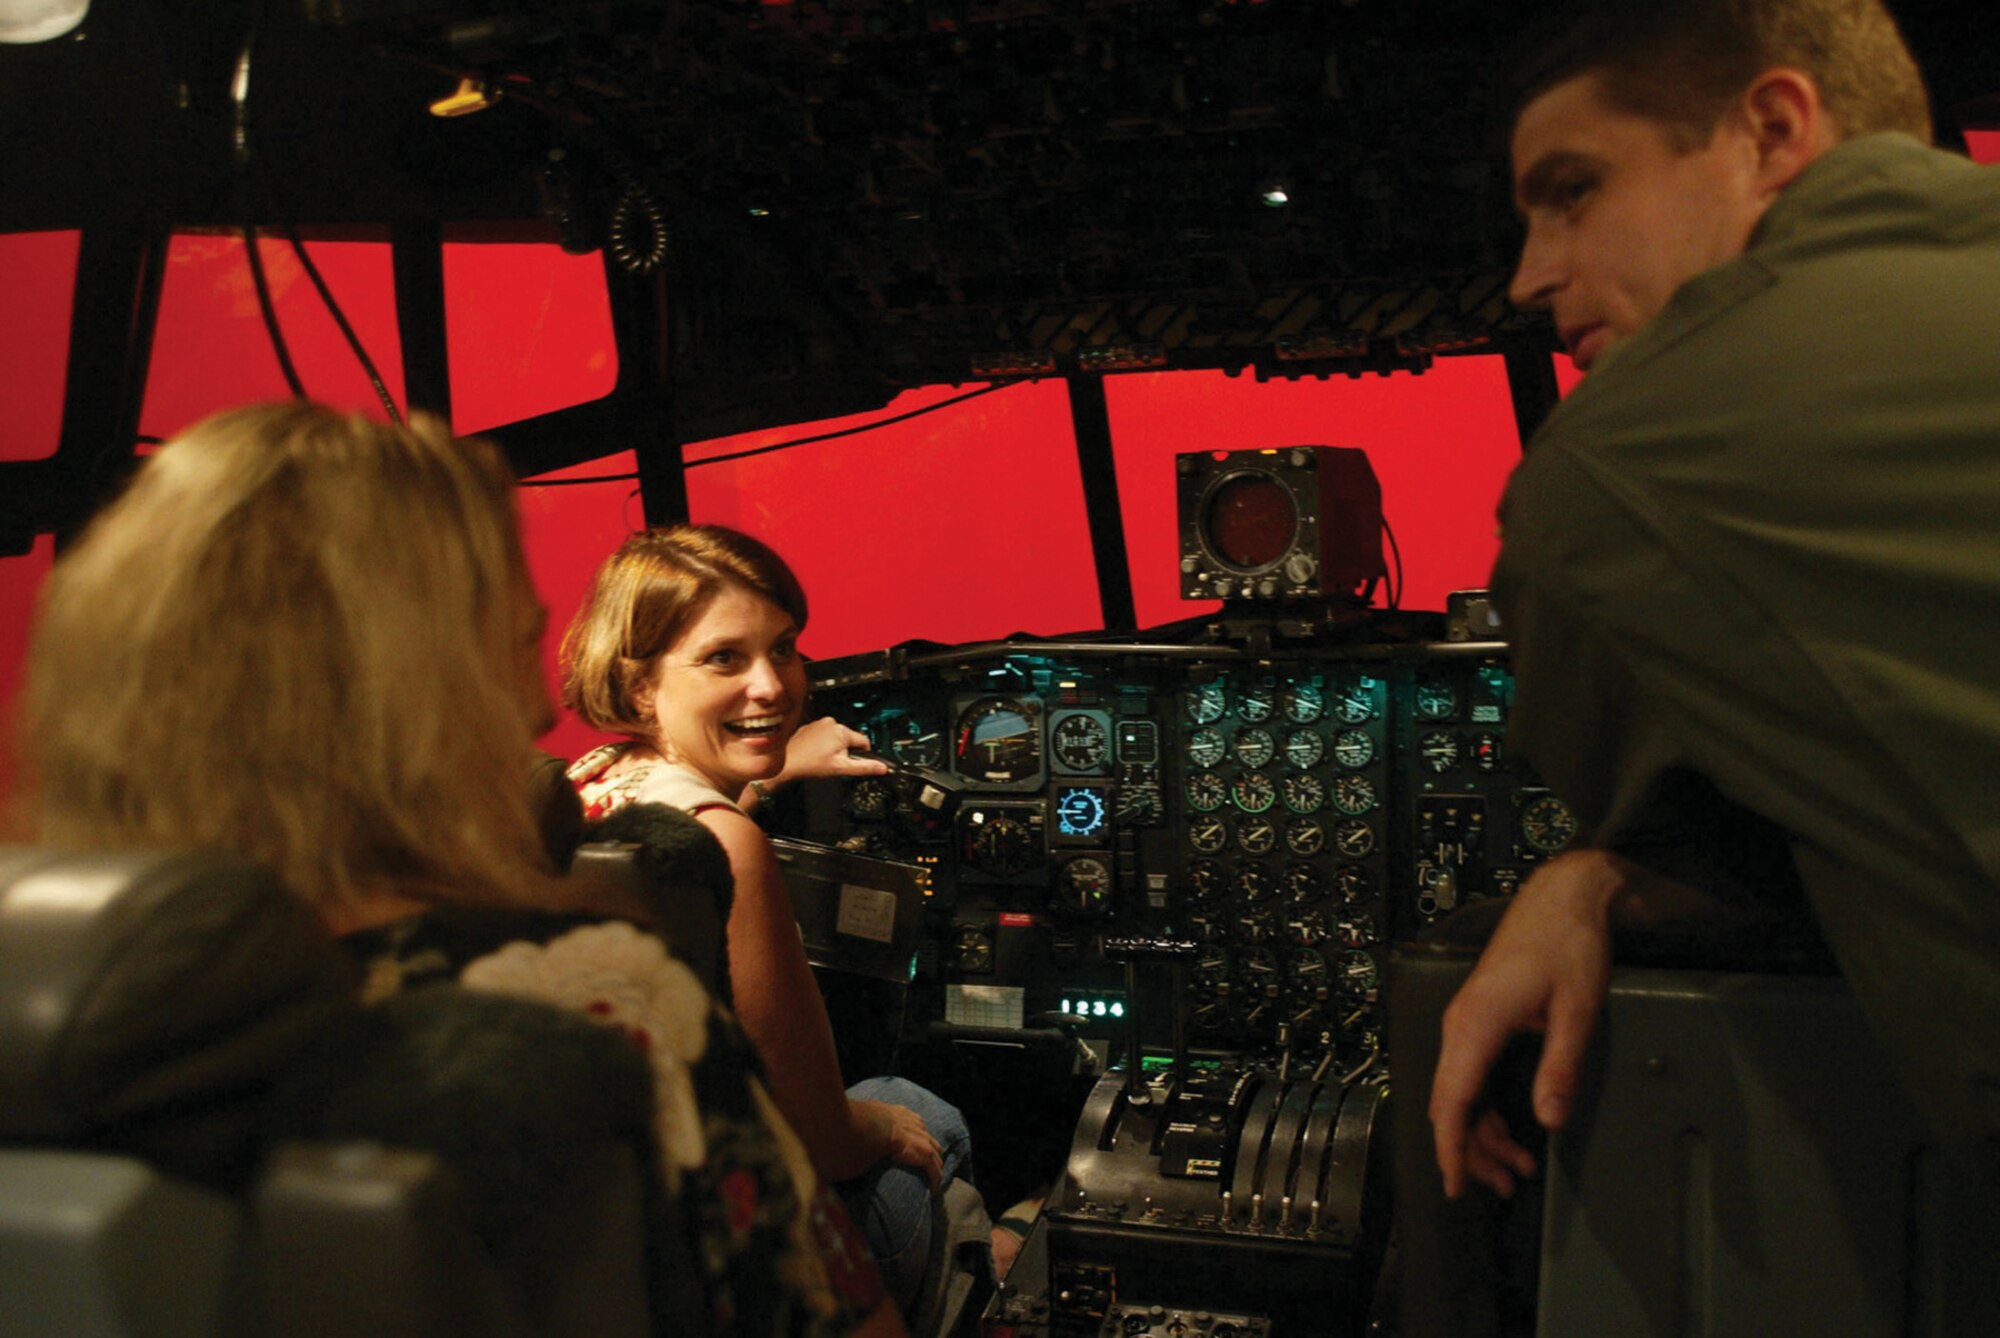 Lisa Allen, wife of Lt. Col. Rob Allen of the 700th Airlift Squadron, has a laugh  after a "rough landing" that resulted in the "red screen of death" at the Eastern Regional Flight Simulator here. Spouses were treated to a full day of reserve life as part of the annual event meant to help reward spouses of Airmen in retention critical areas. 